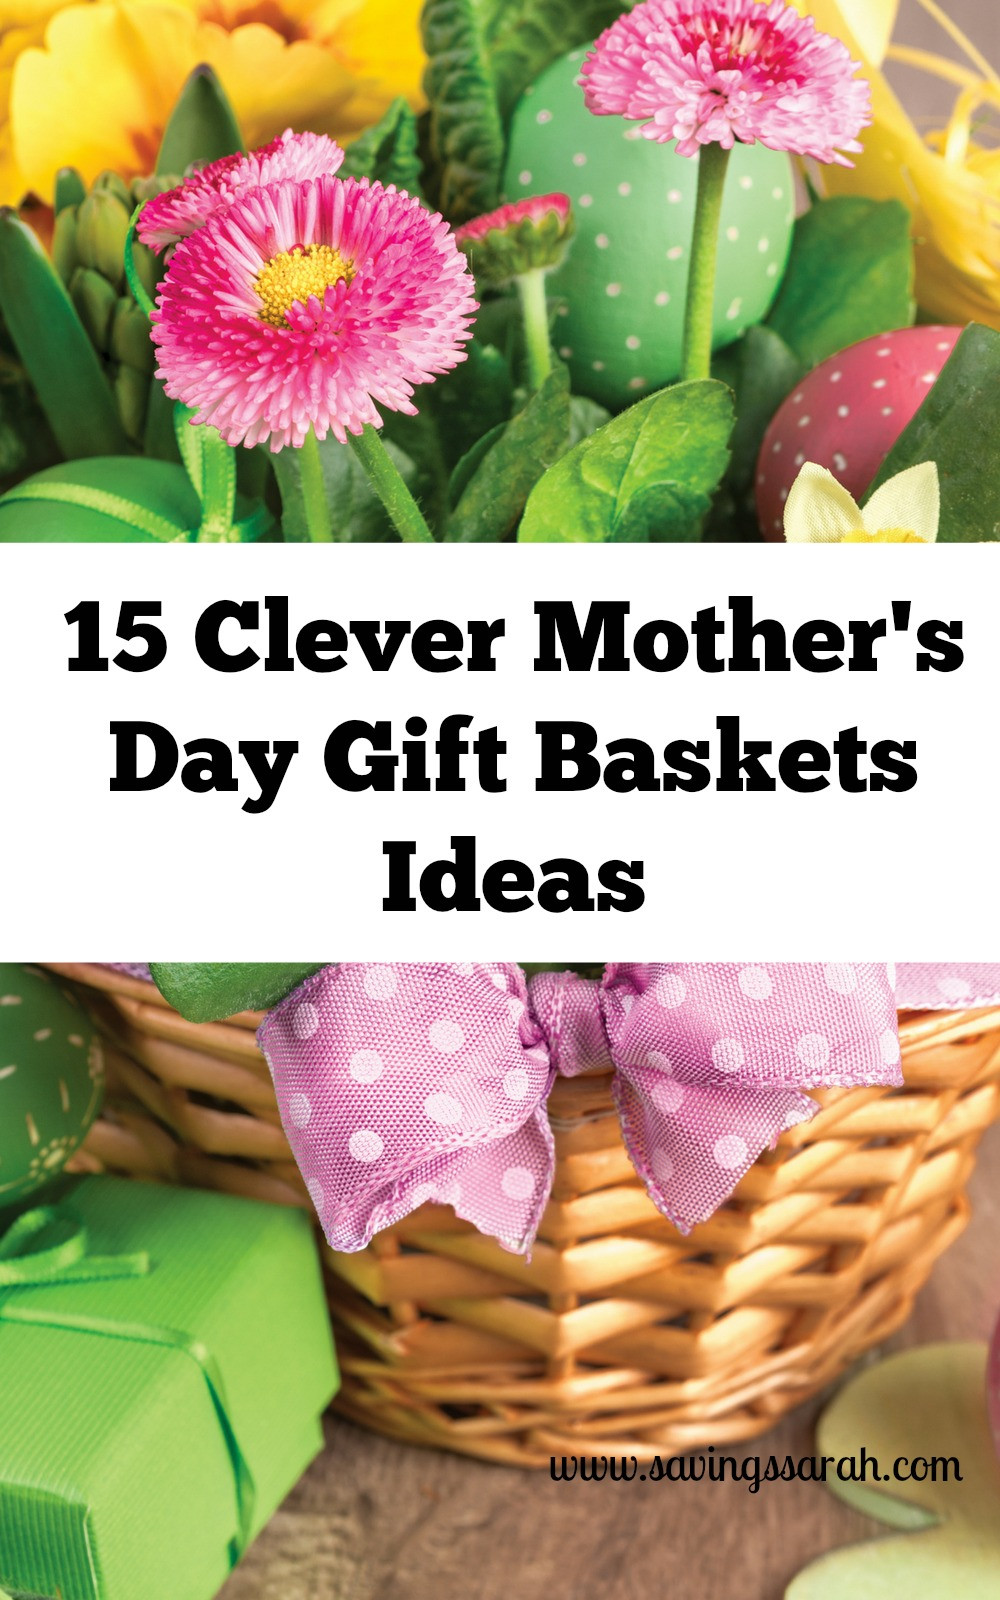 Clever Gift Basket Theme Ideas
 15 Clever Mother s Day Gift Baskets Ideas Earning and